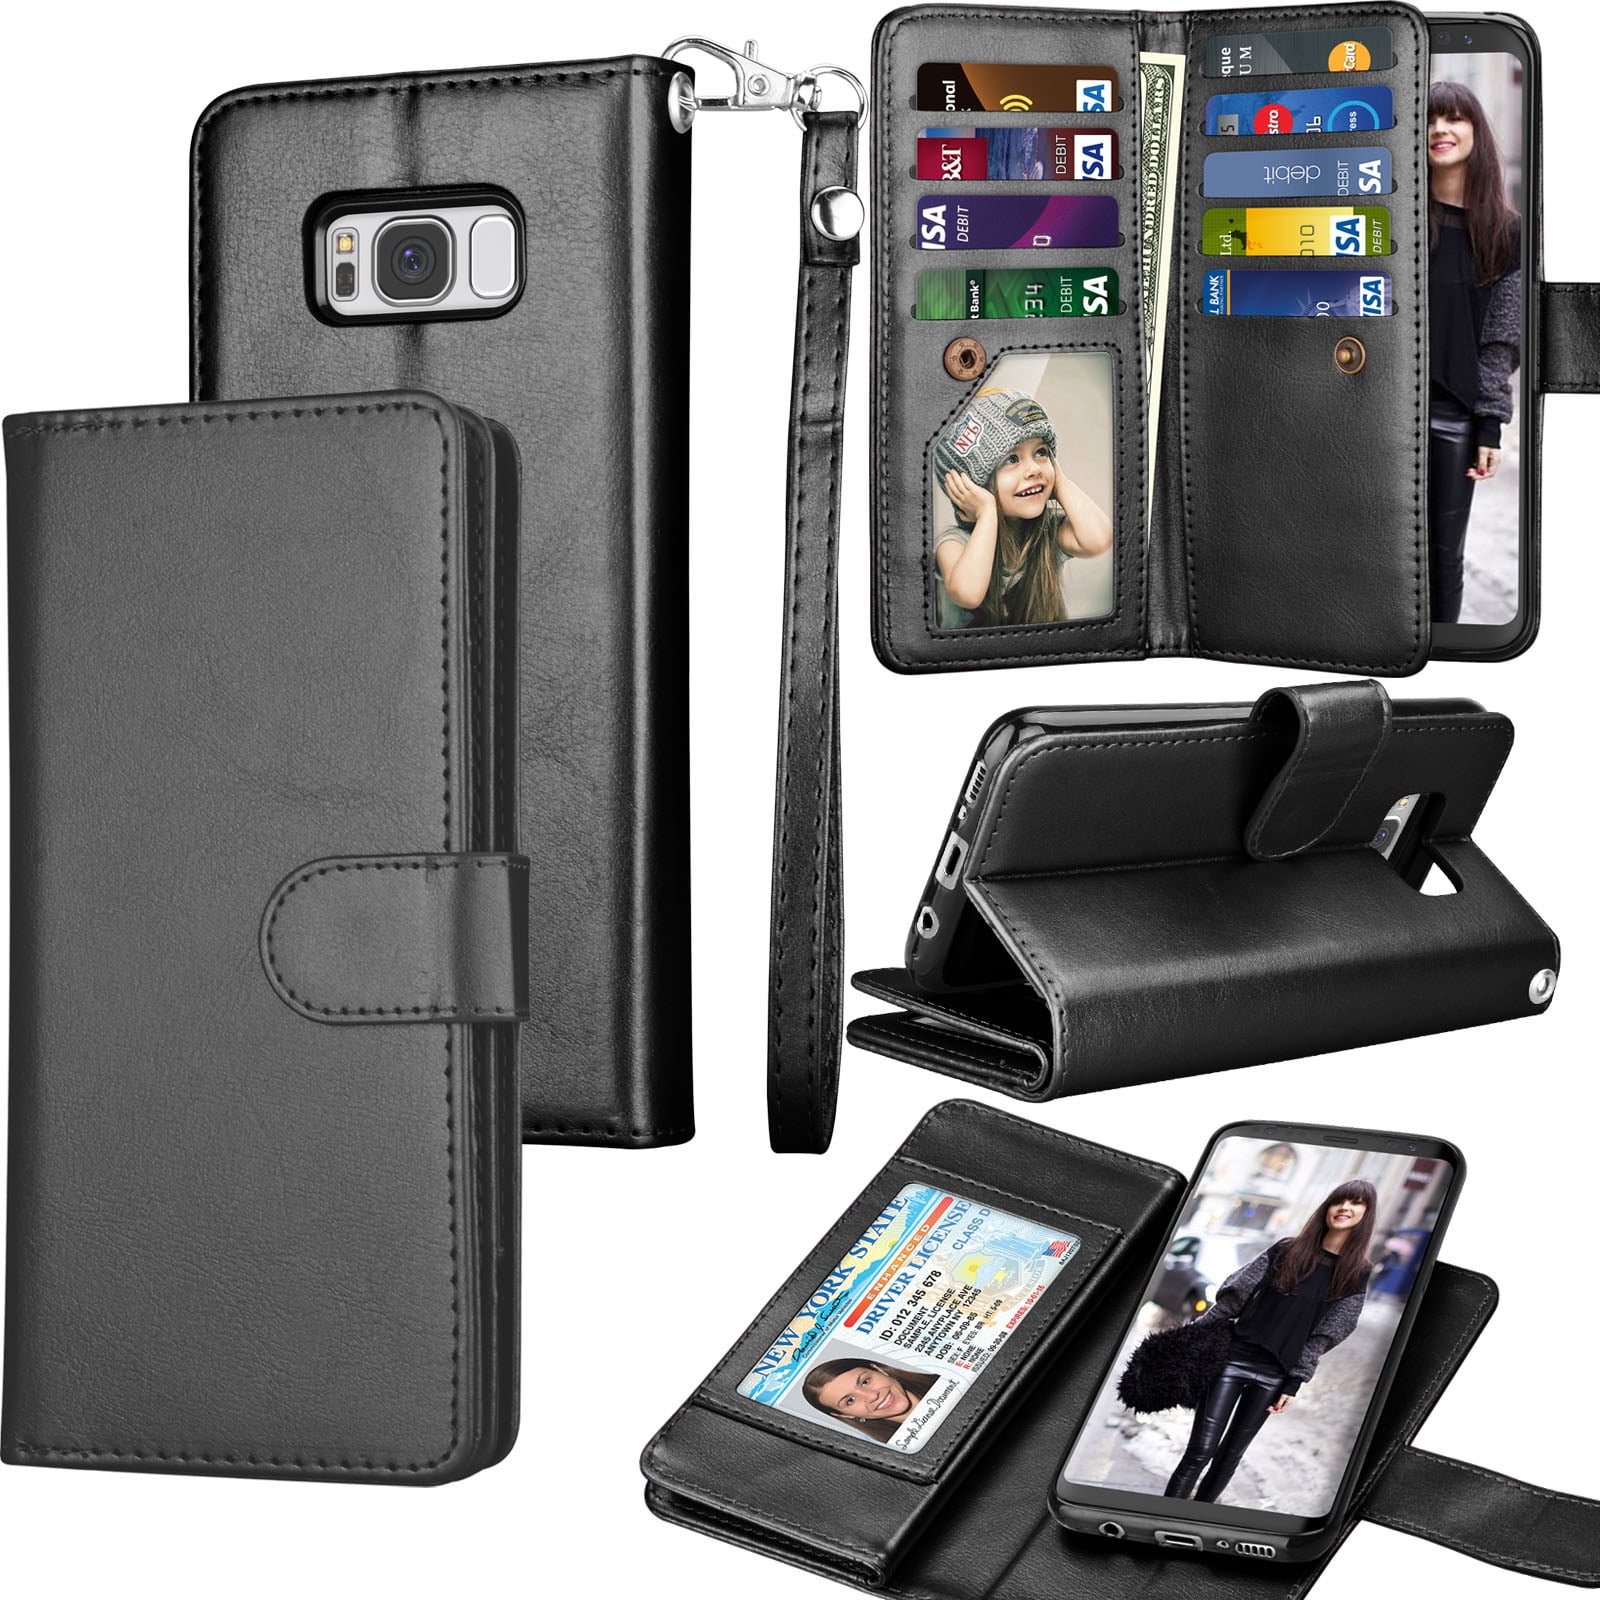 PU Leather Case Compatible with Samsung Galaxy S8 Cell Phone Business-Design Flip Cover for Samsung Galaxy S8